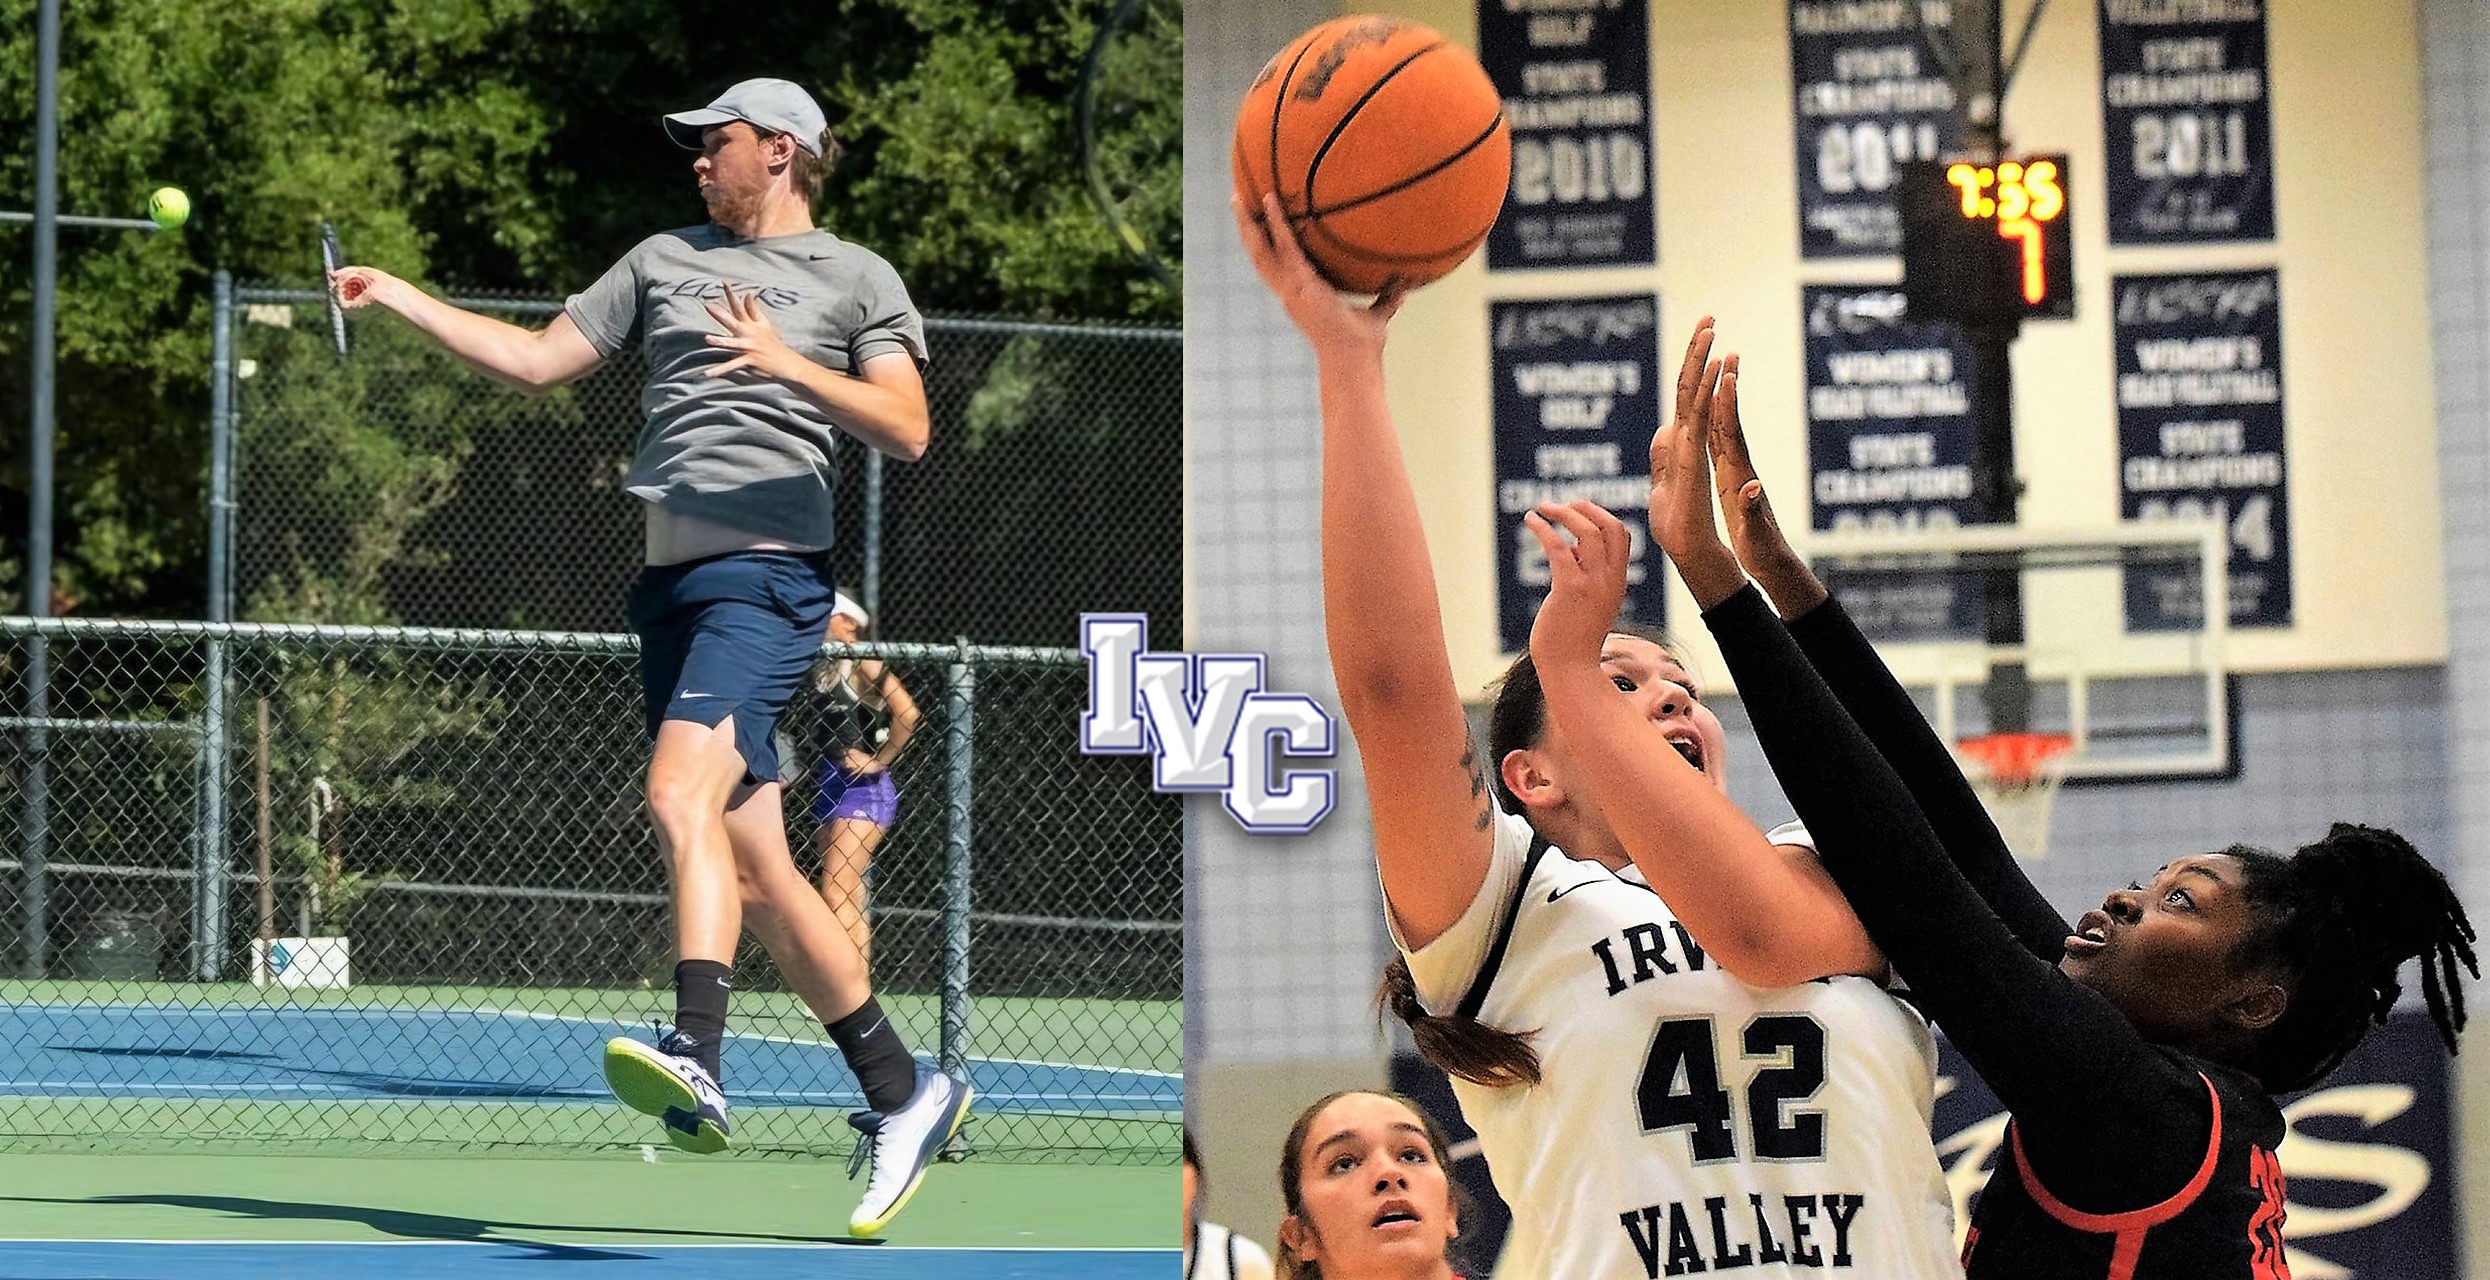 Irvine Valley's athletes of the Year are Tomlinson and Grove